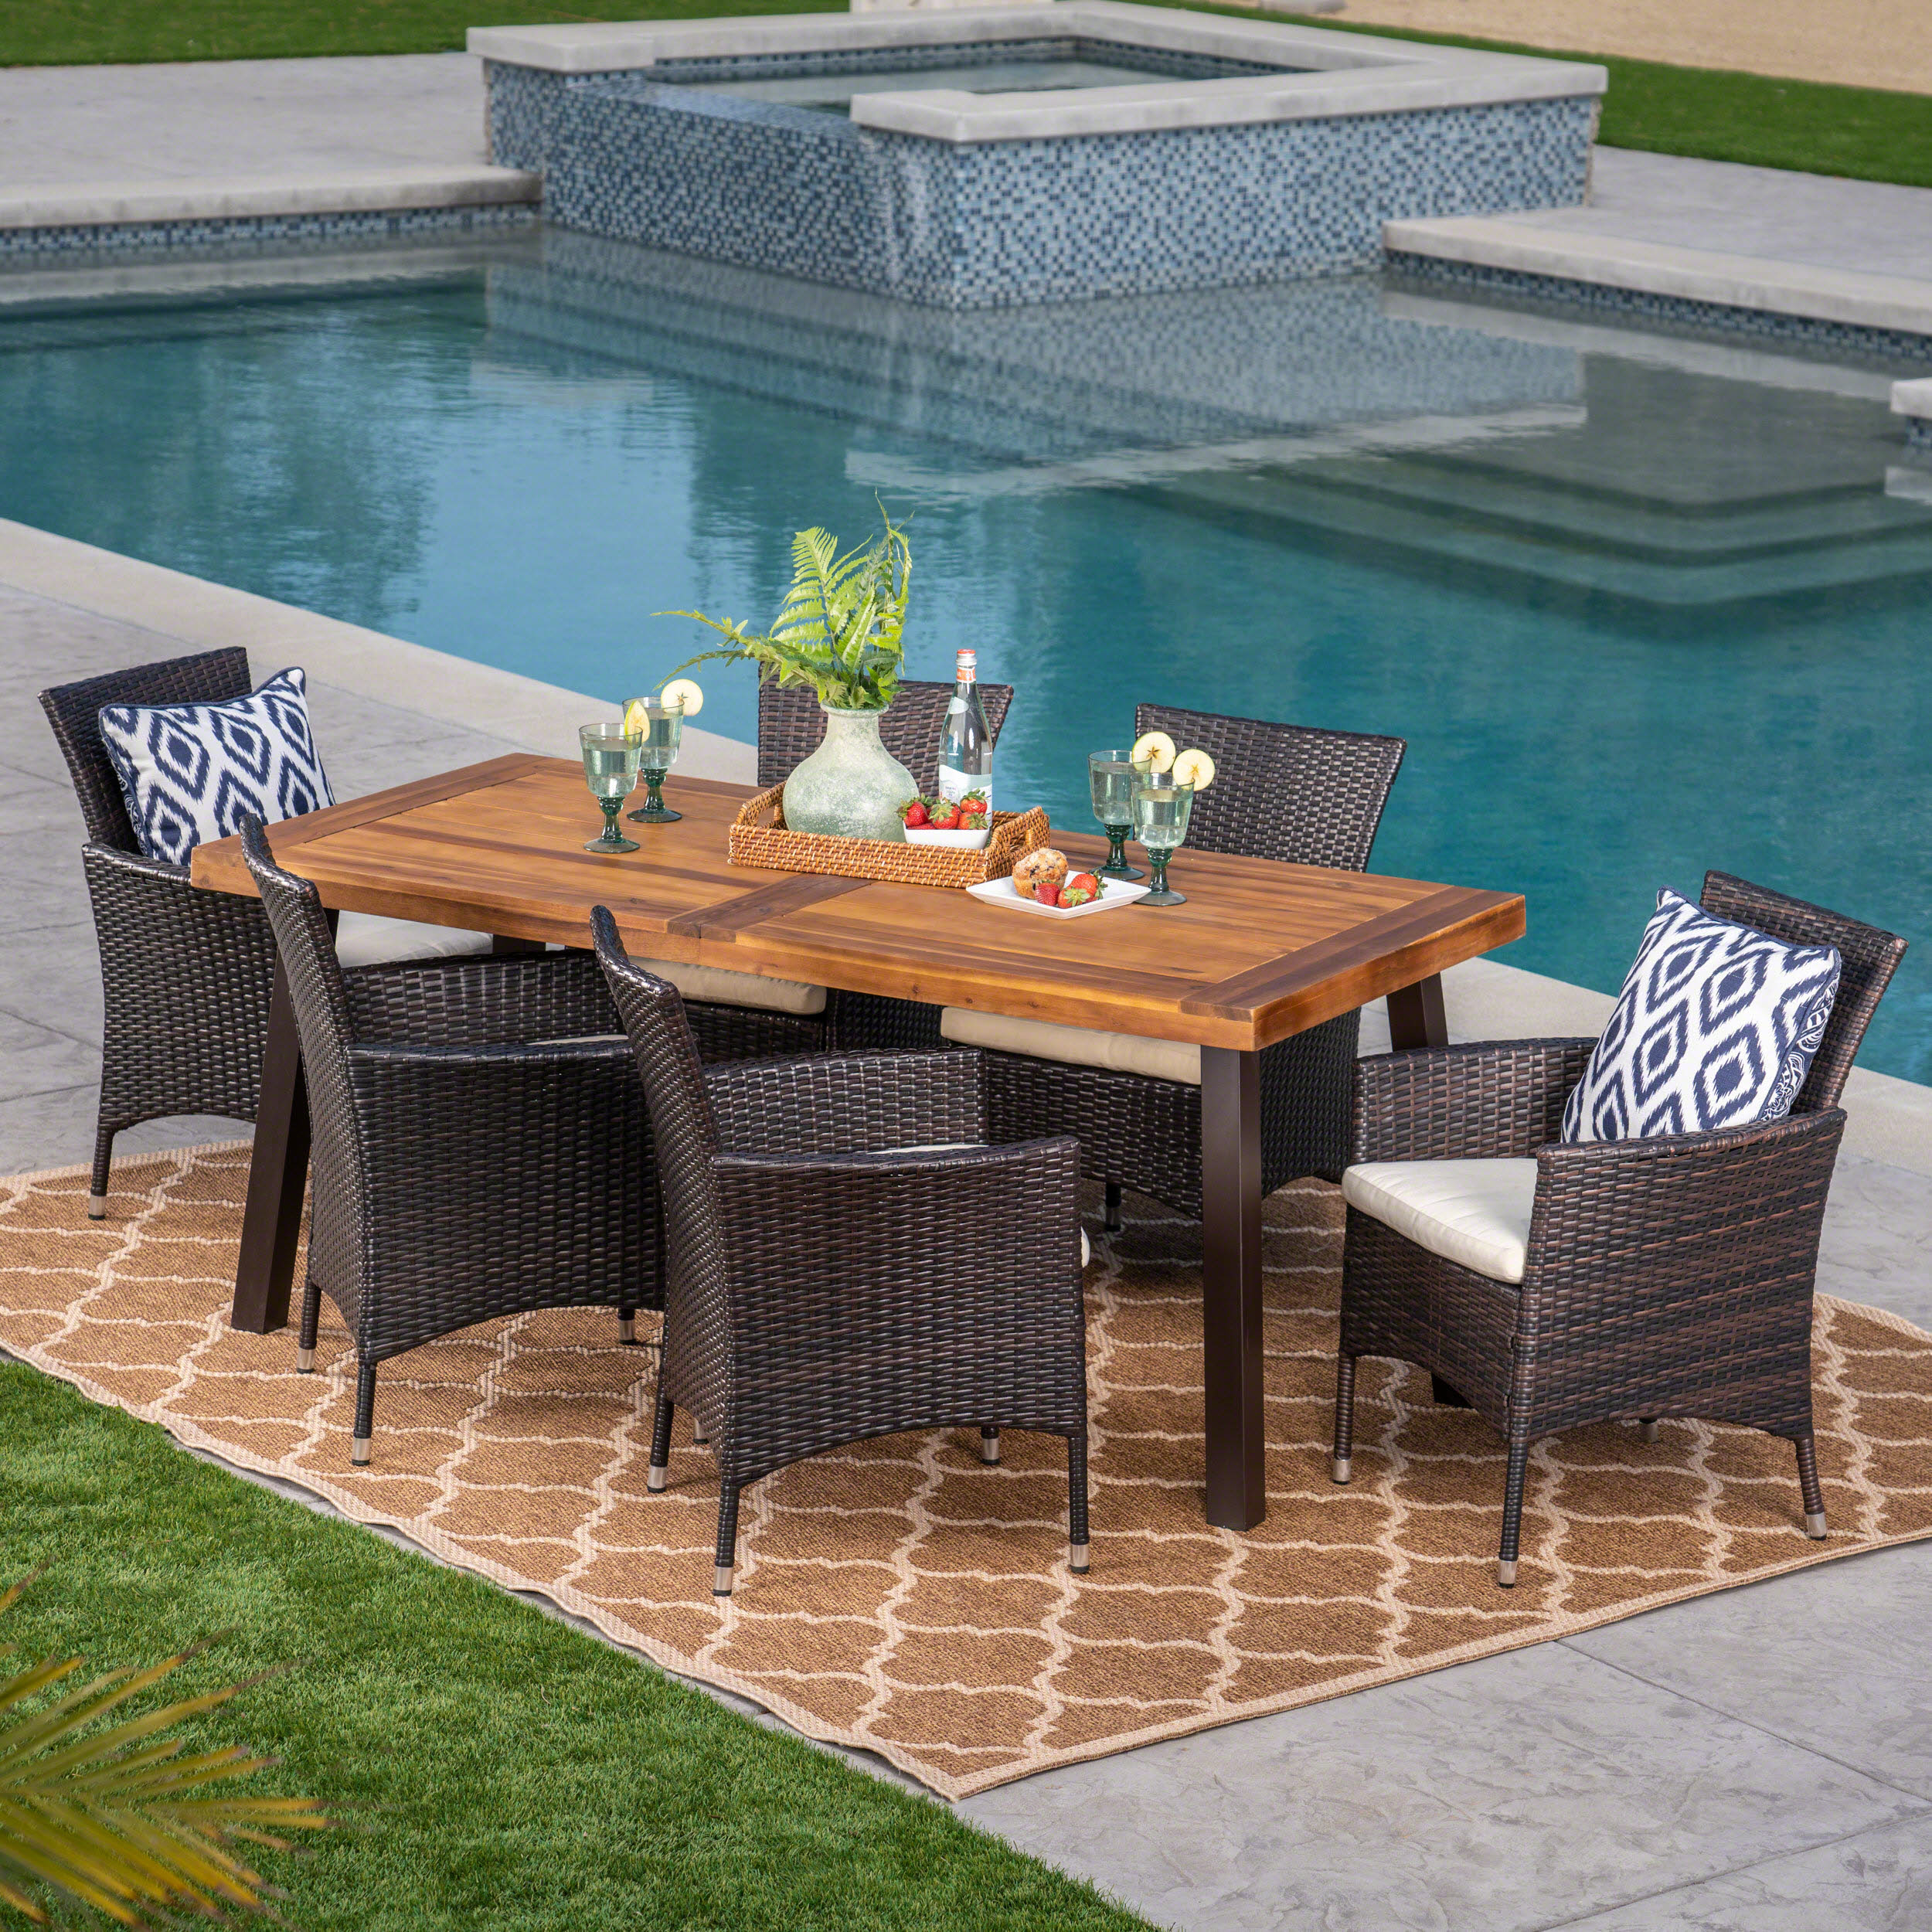 Outdoor 7 Piece Acacia Wood/Wicker Dining Set with Cushions, Multibrown, Beige, Teak - image 1 of 7